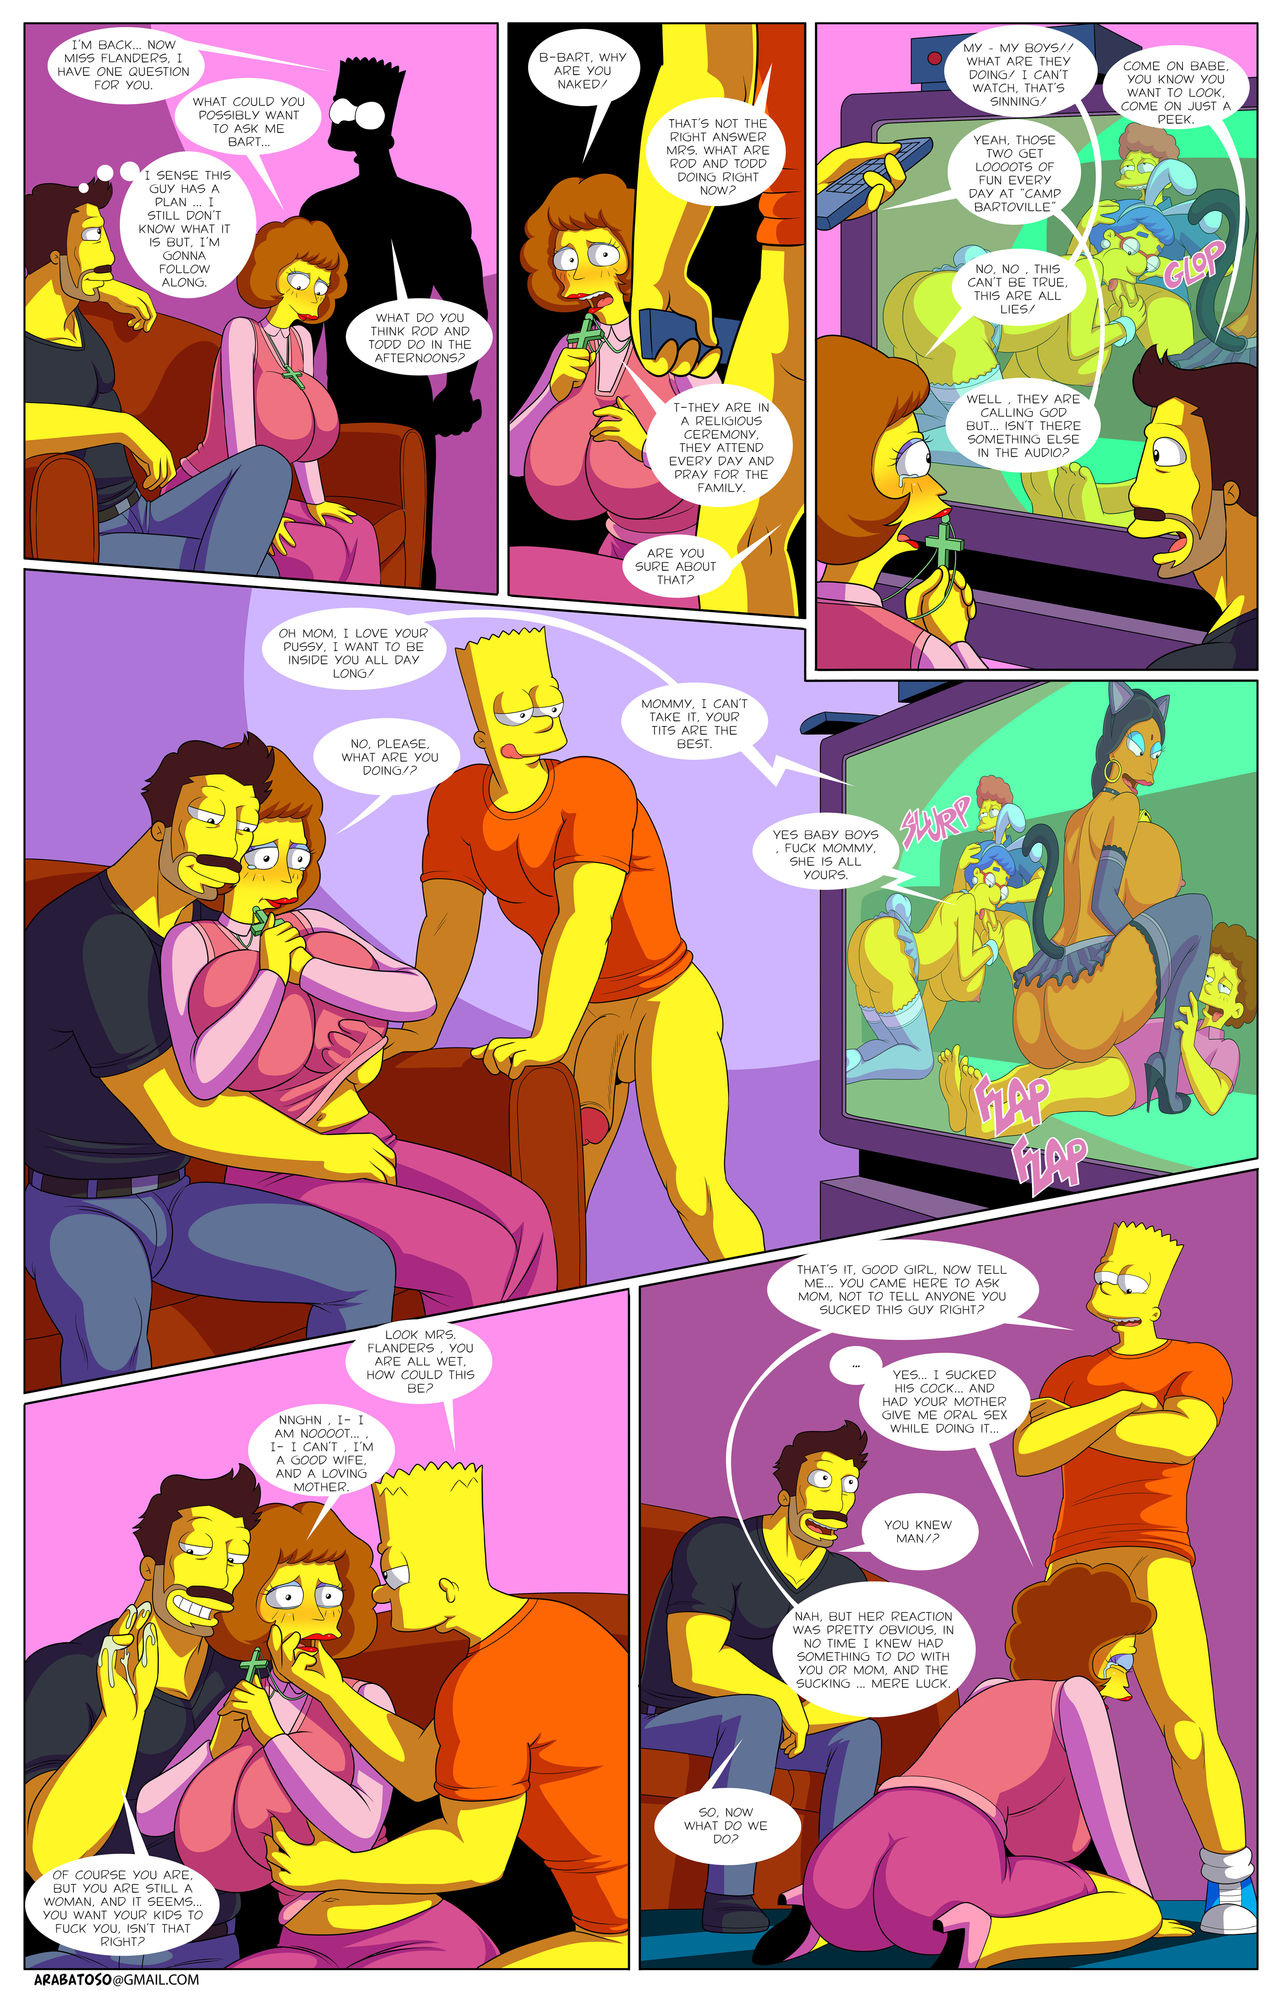 Darren's Adventure or Welcome To Springfield porn comics Oral sex, Anal Sex, Big Tits, Blowjob, Double Penetration, Group Sex, incest, Lesbians, Masturbation, Stockings, Straight, Titfuck